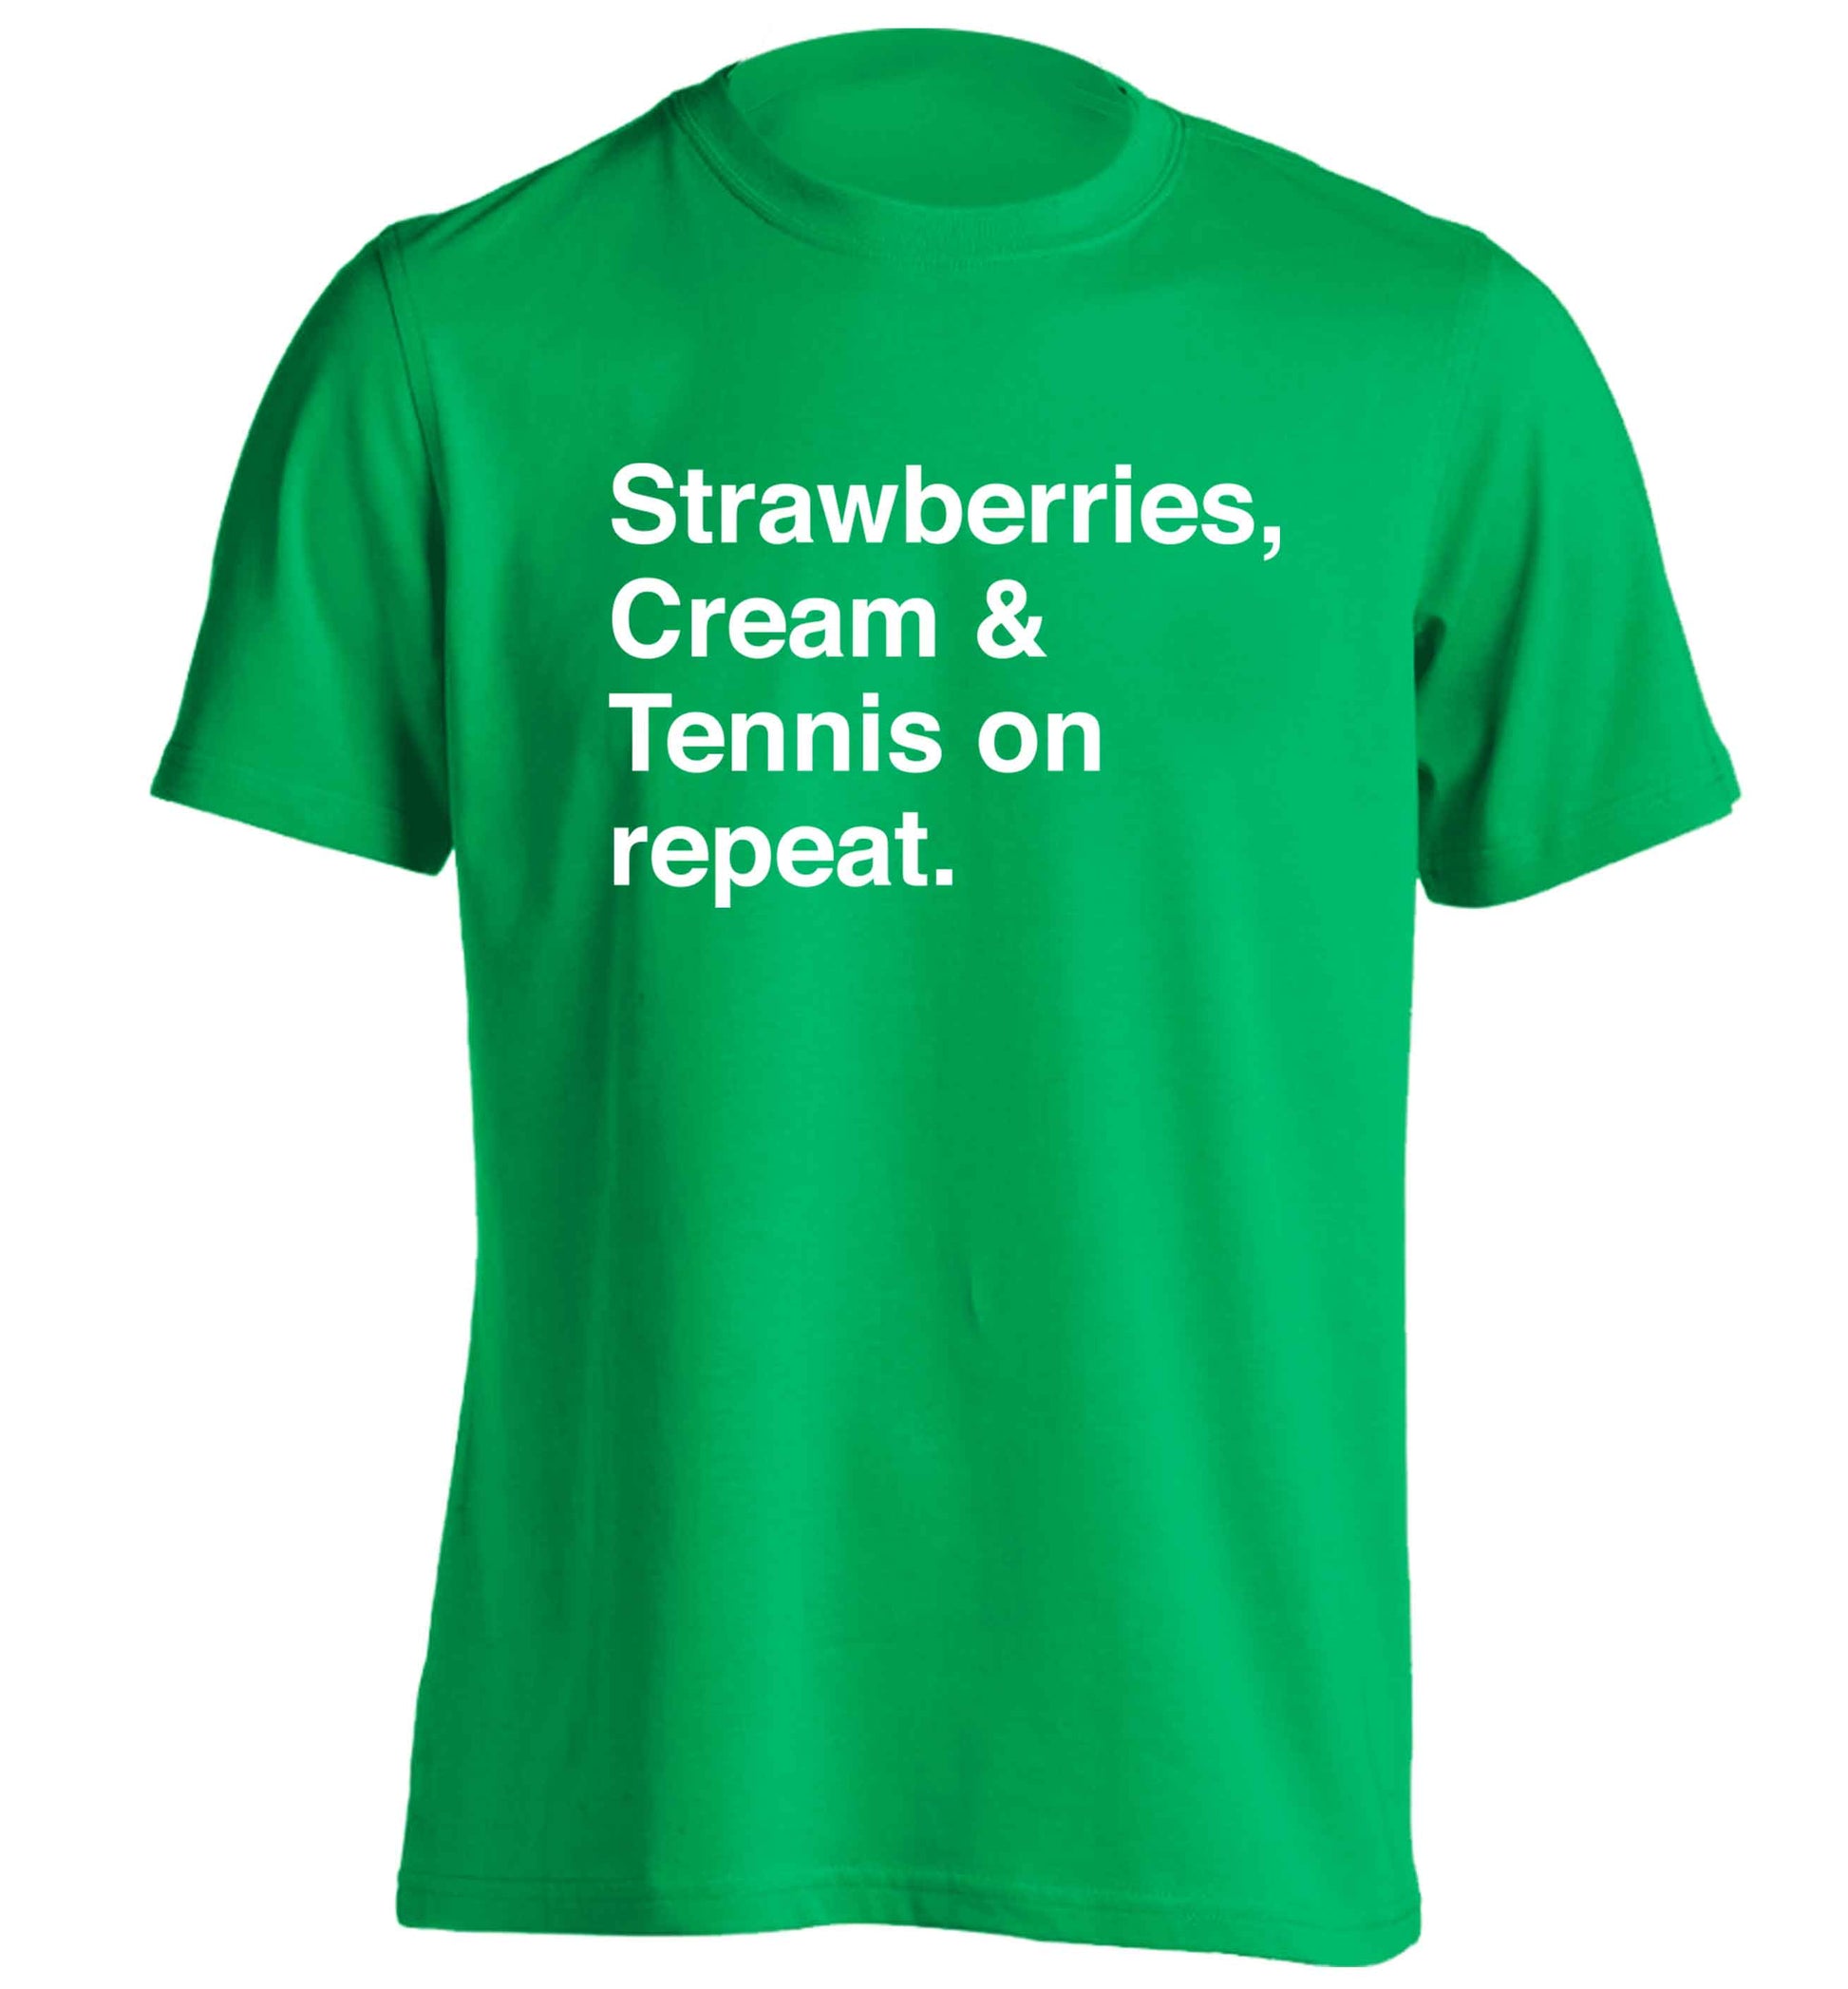 Strawberries, cream and tennis on repeat adults unisex green Tshirt 2XL